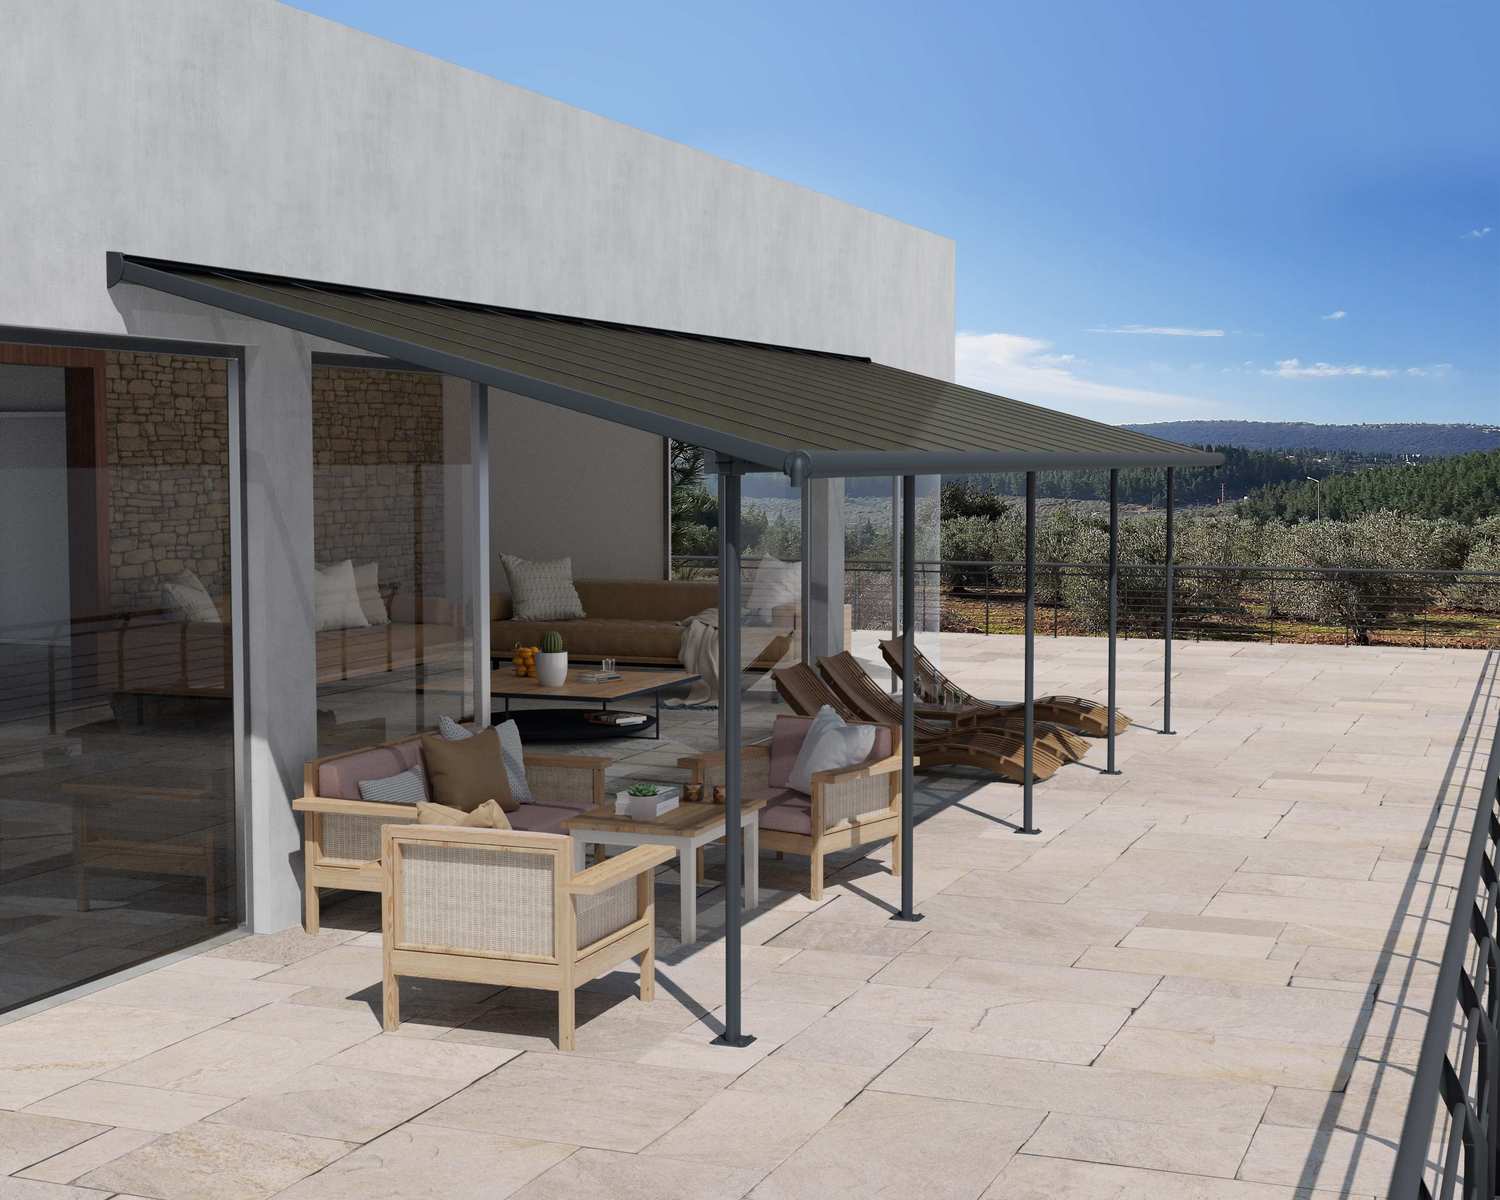 Capri 10 ft. x 28 ft. Grey Aluminium Patio Cover with 5 Posts Attached to House That Covers Patio Outdoor Furniture.